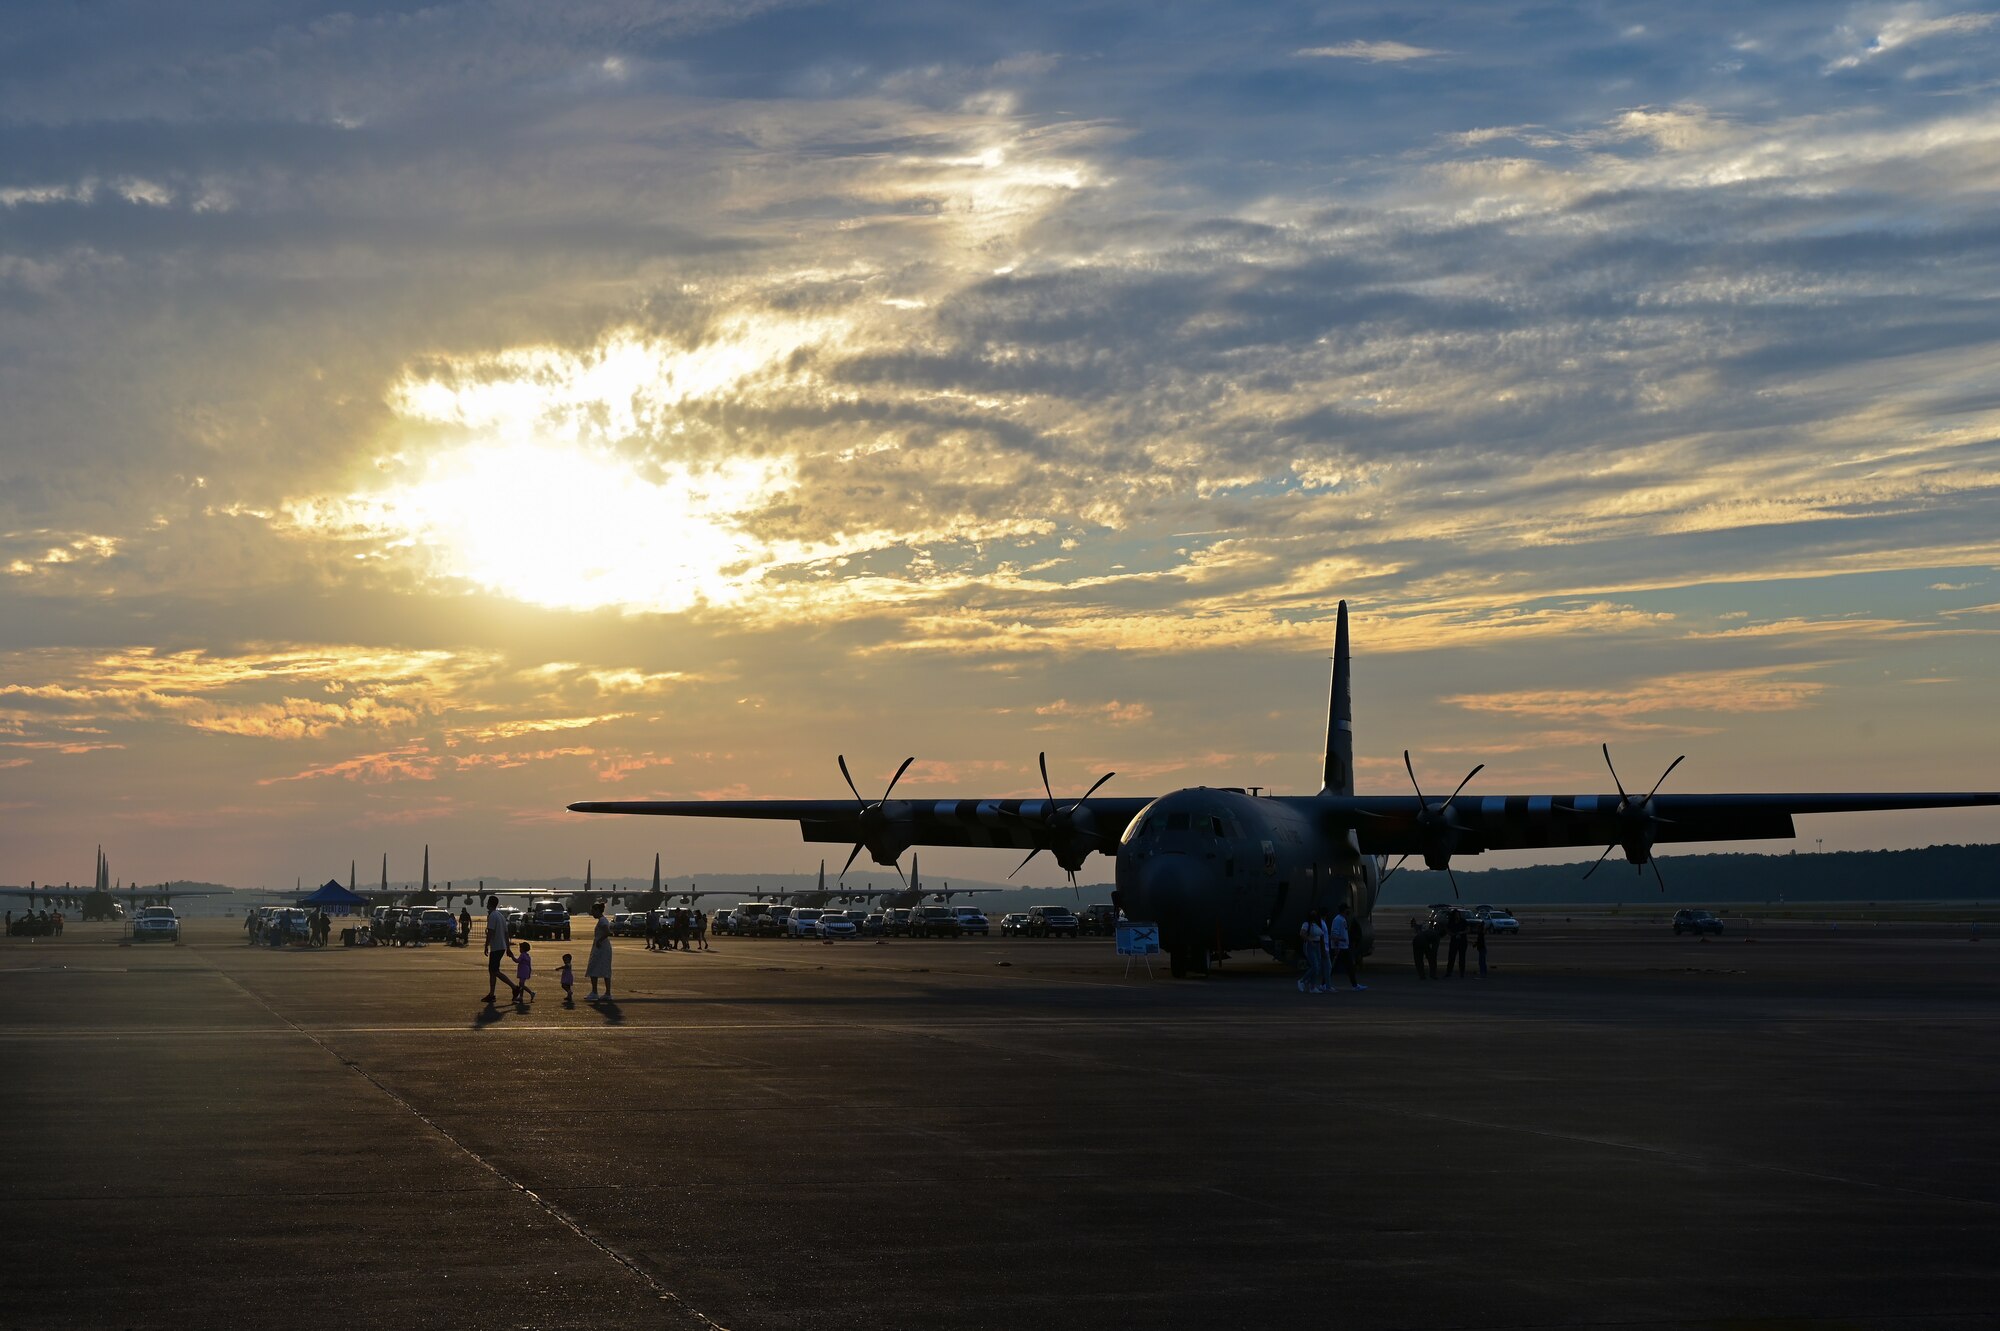 A Family walks in front of an aircraft at sunset